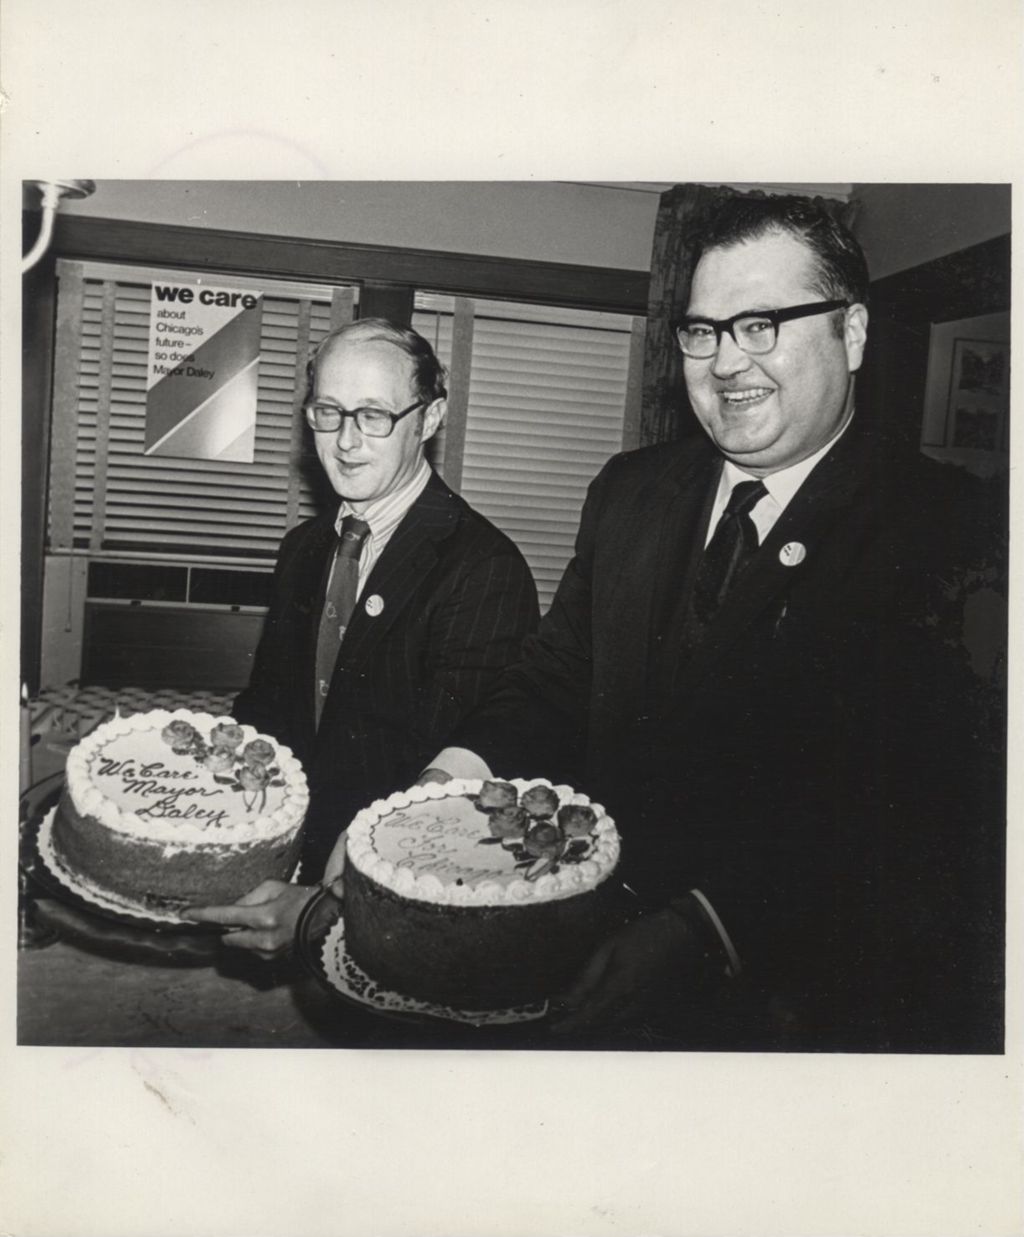 Miniature of Two men holding cakes that read "We Care Mayor Daley"